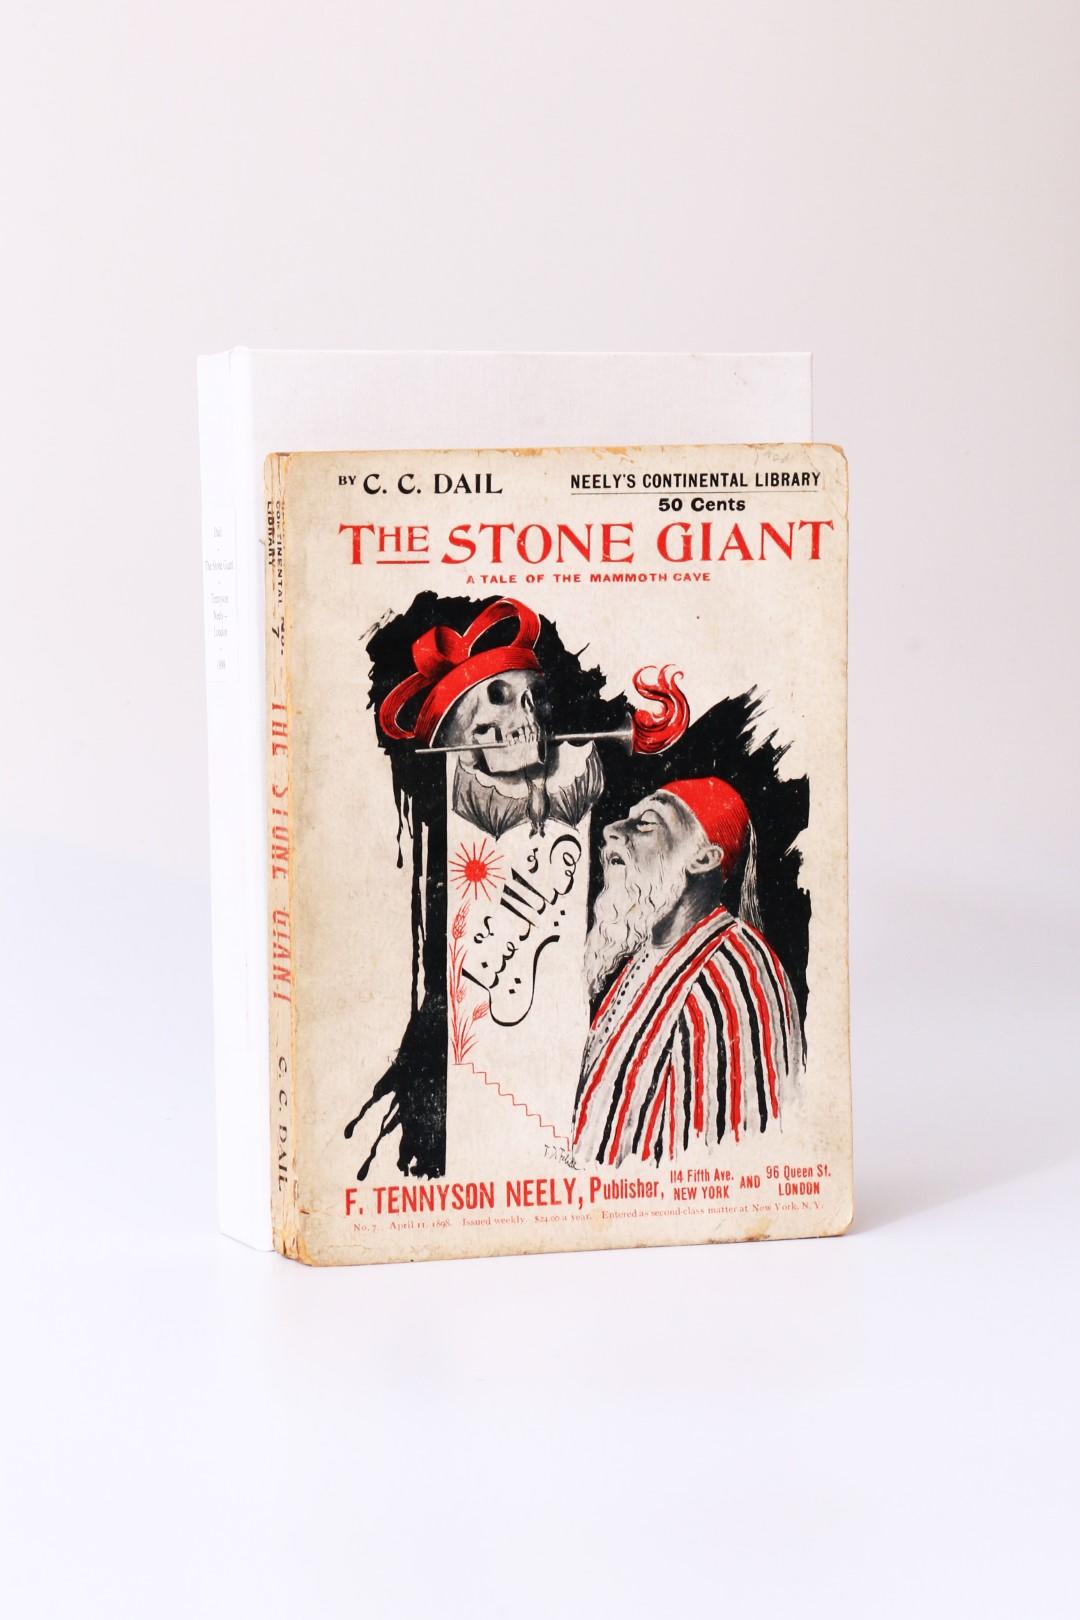 C.C. Dail - The Stone Giant - A Tale of the Mammoth Cave - F. Tennyson Neely, 1898, First Edition.